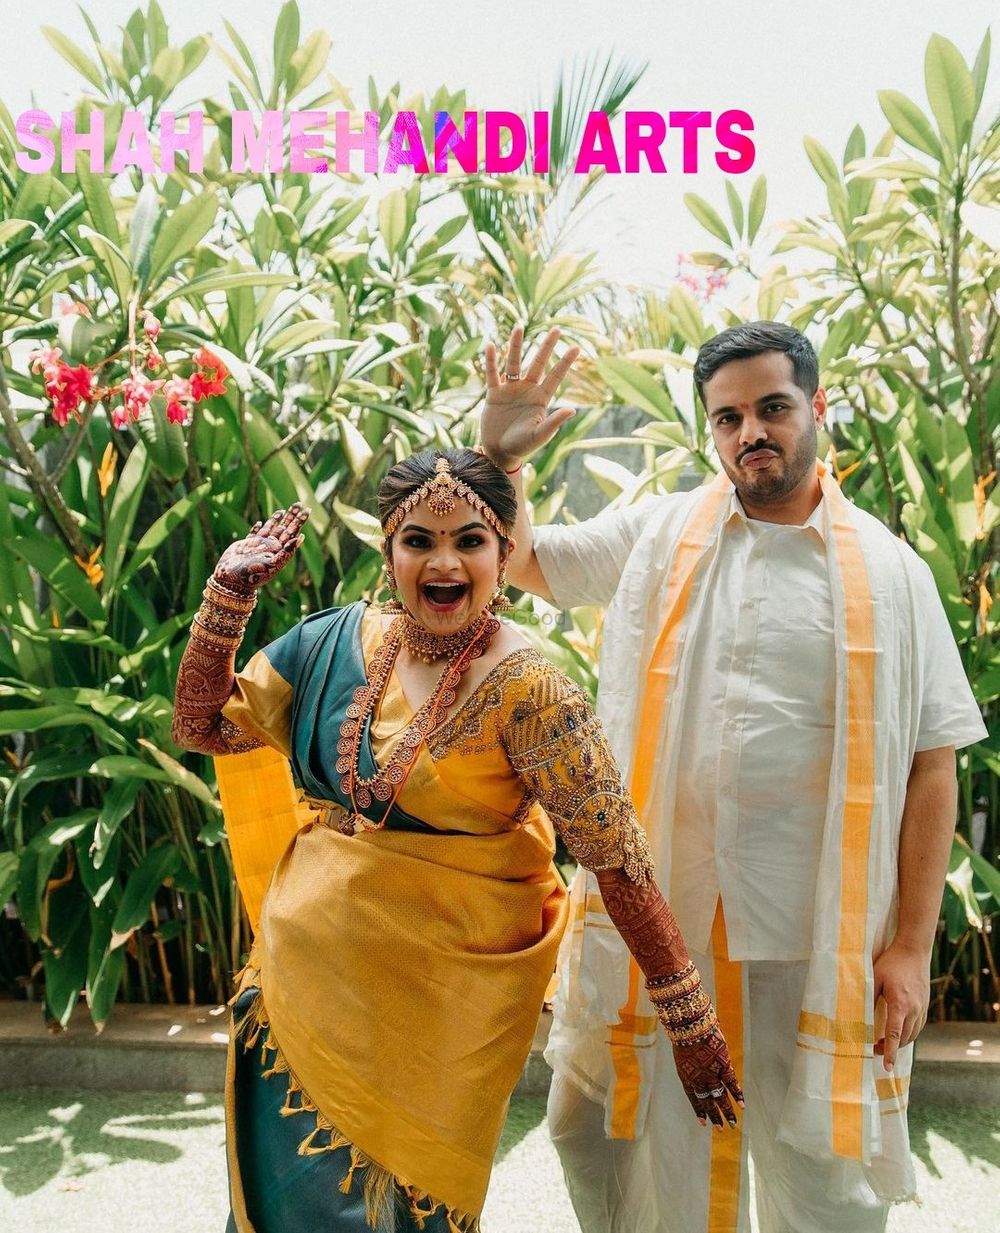 Photo From WedSafe - By Shah Mehandi Arts